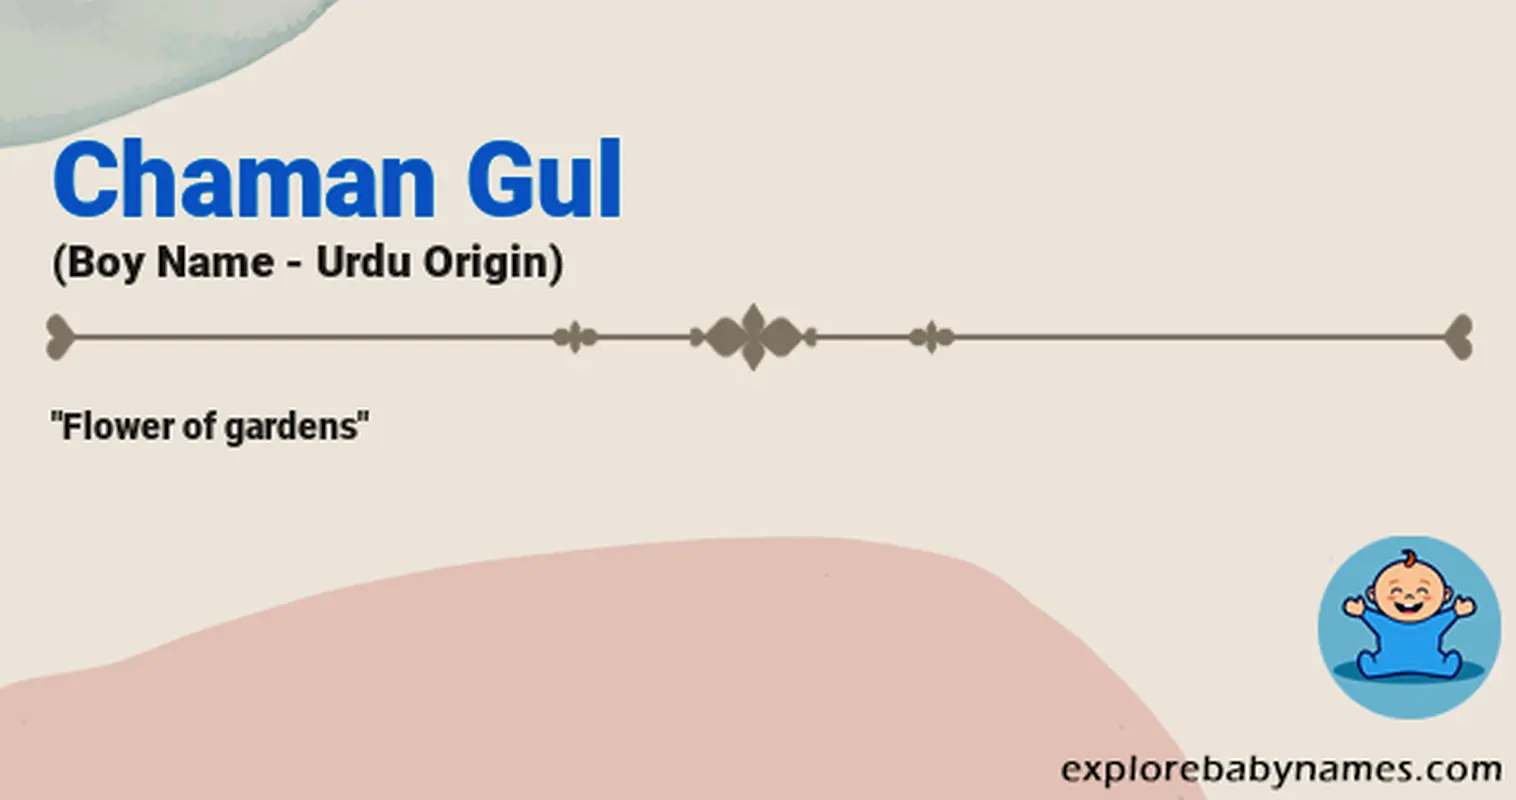 Meaning of Chaman Gul